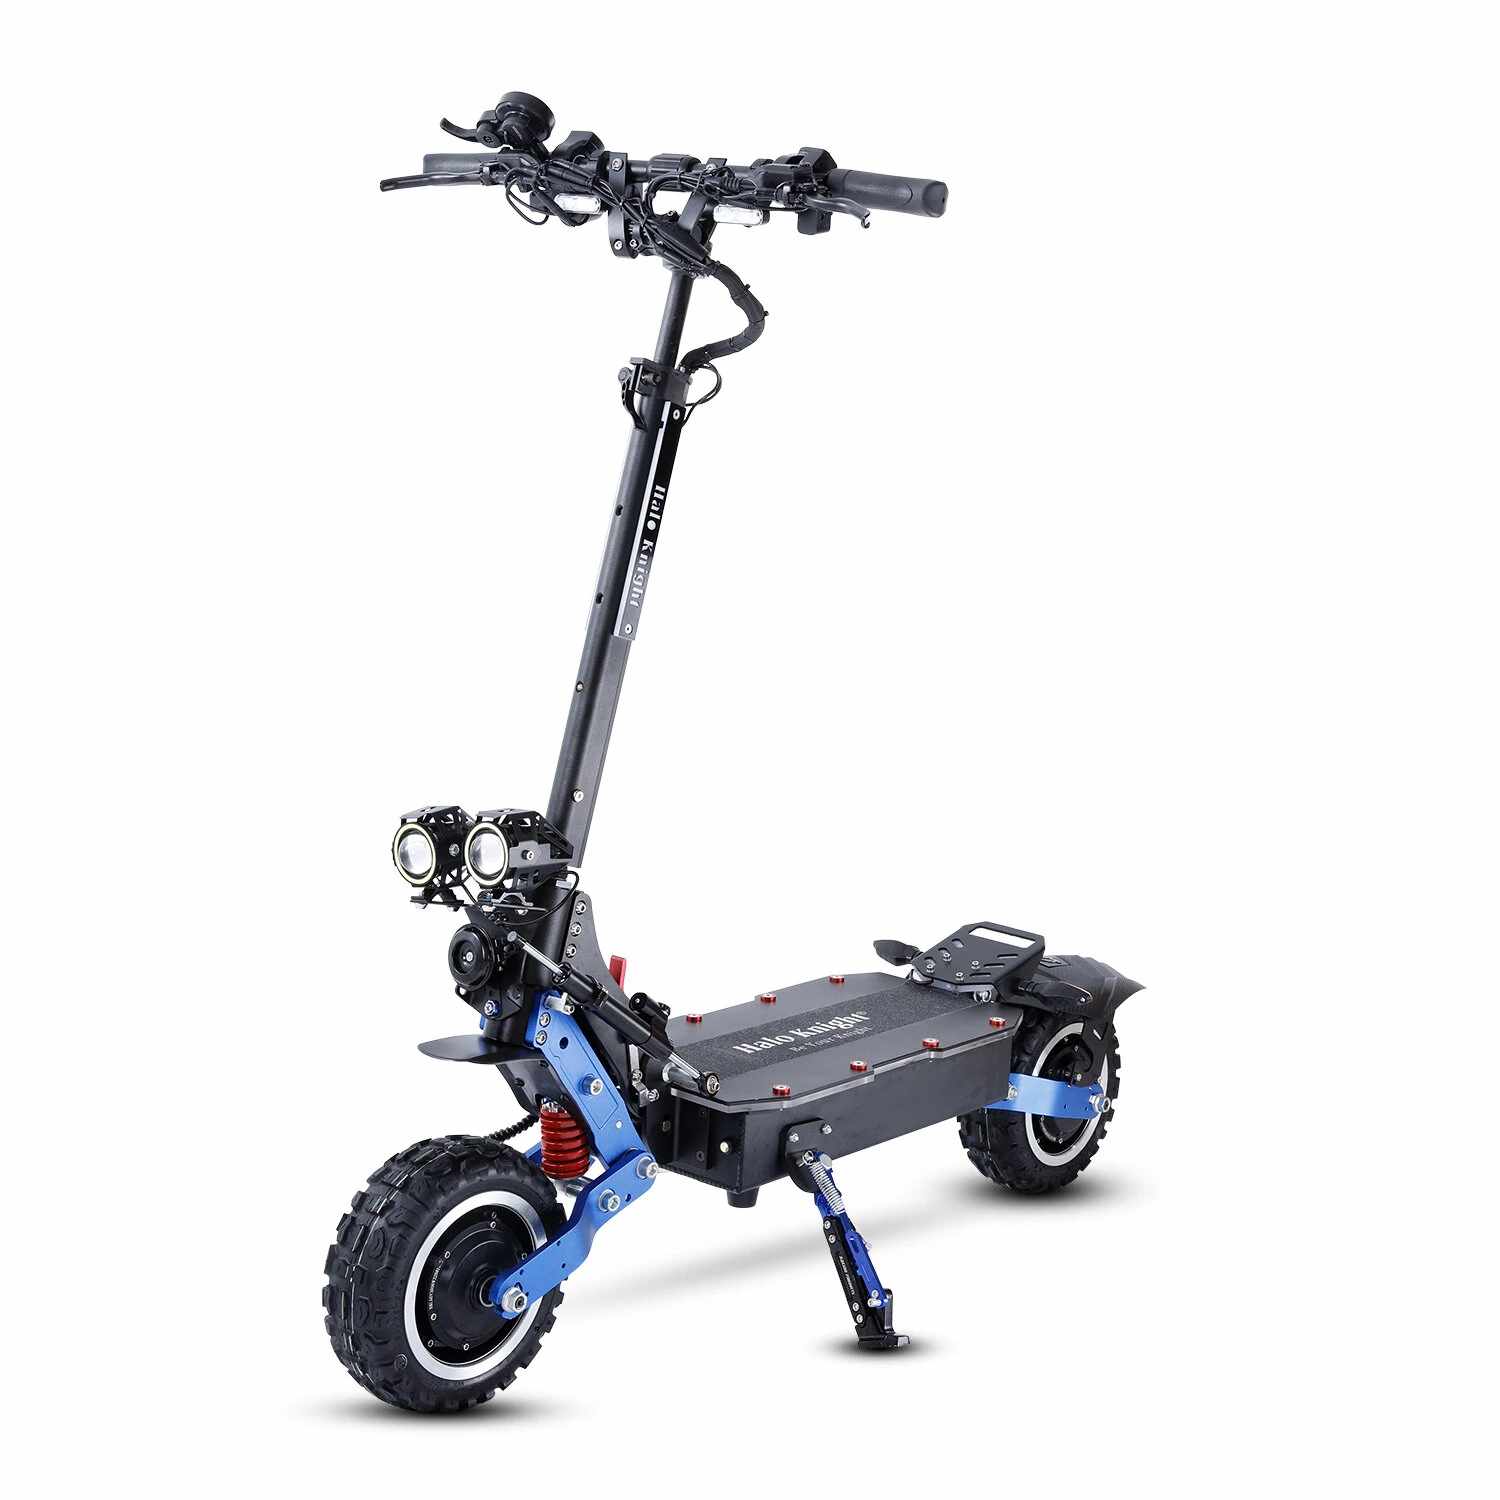 Halo Knight T108 Pro Electric Scooter Banggood Coupon Promo Code (CZ Warehouse)